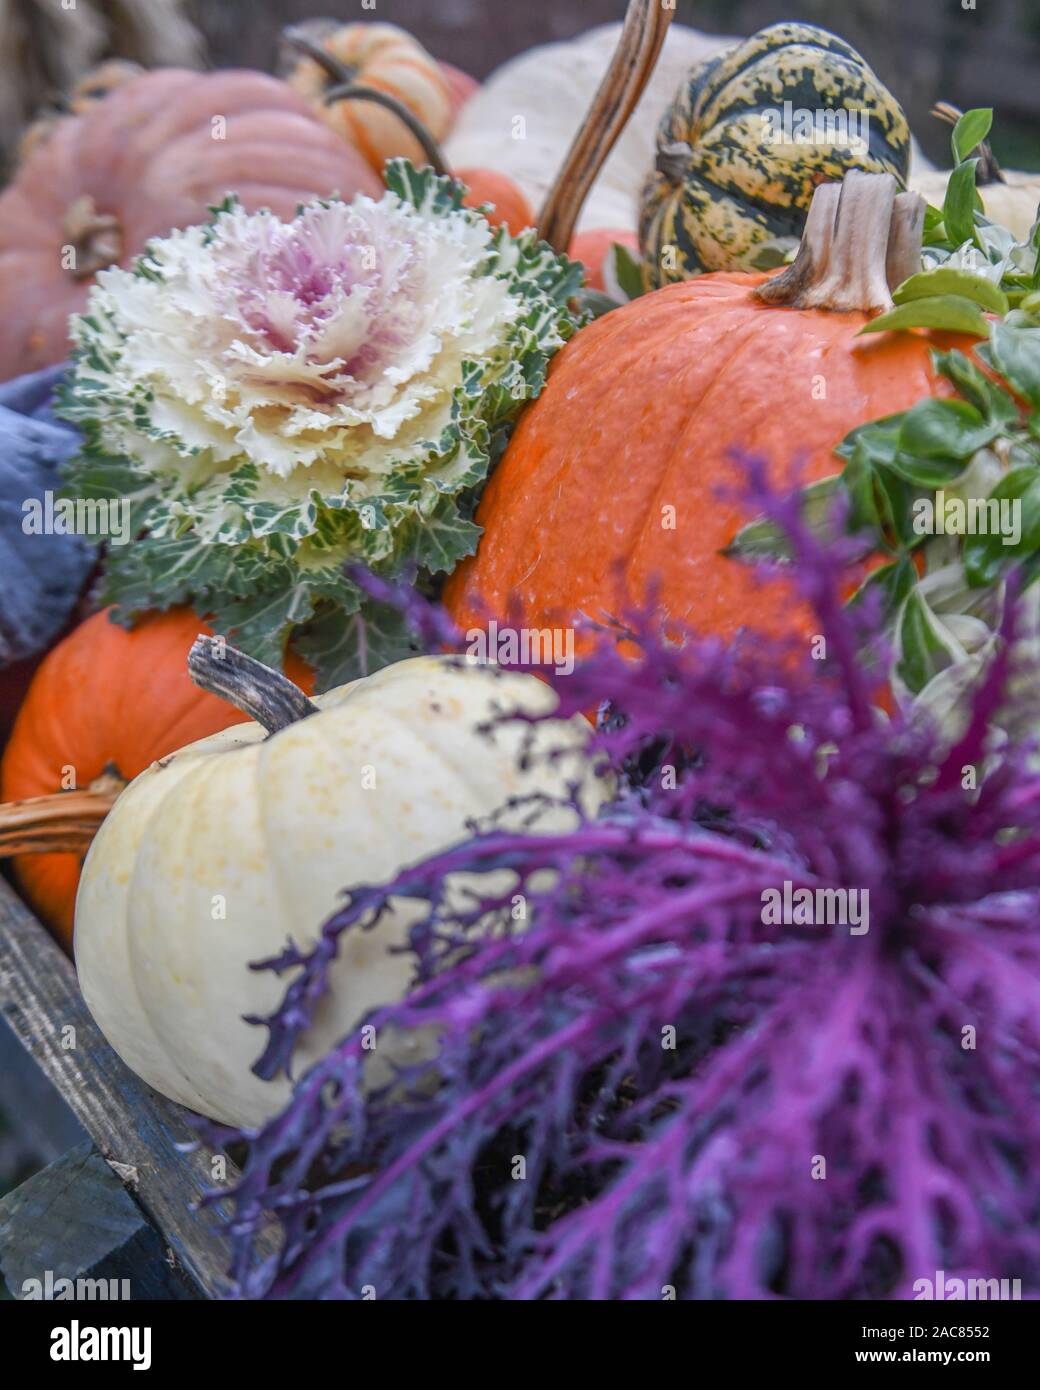 Fall harvest - fall fruits - fall vegetables - fall foods - Thanksgiving cornucopia - apples pears melons squash pumpkins in a Thanksgiving display Stock Photo